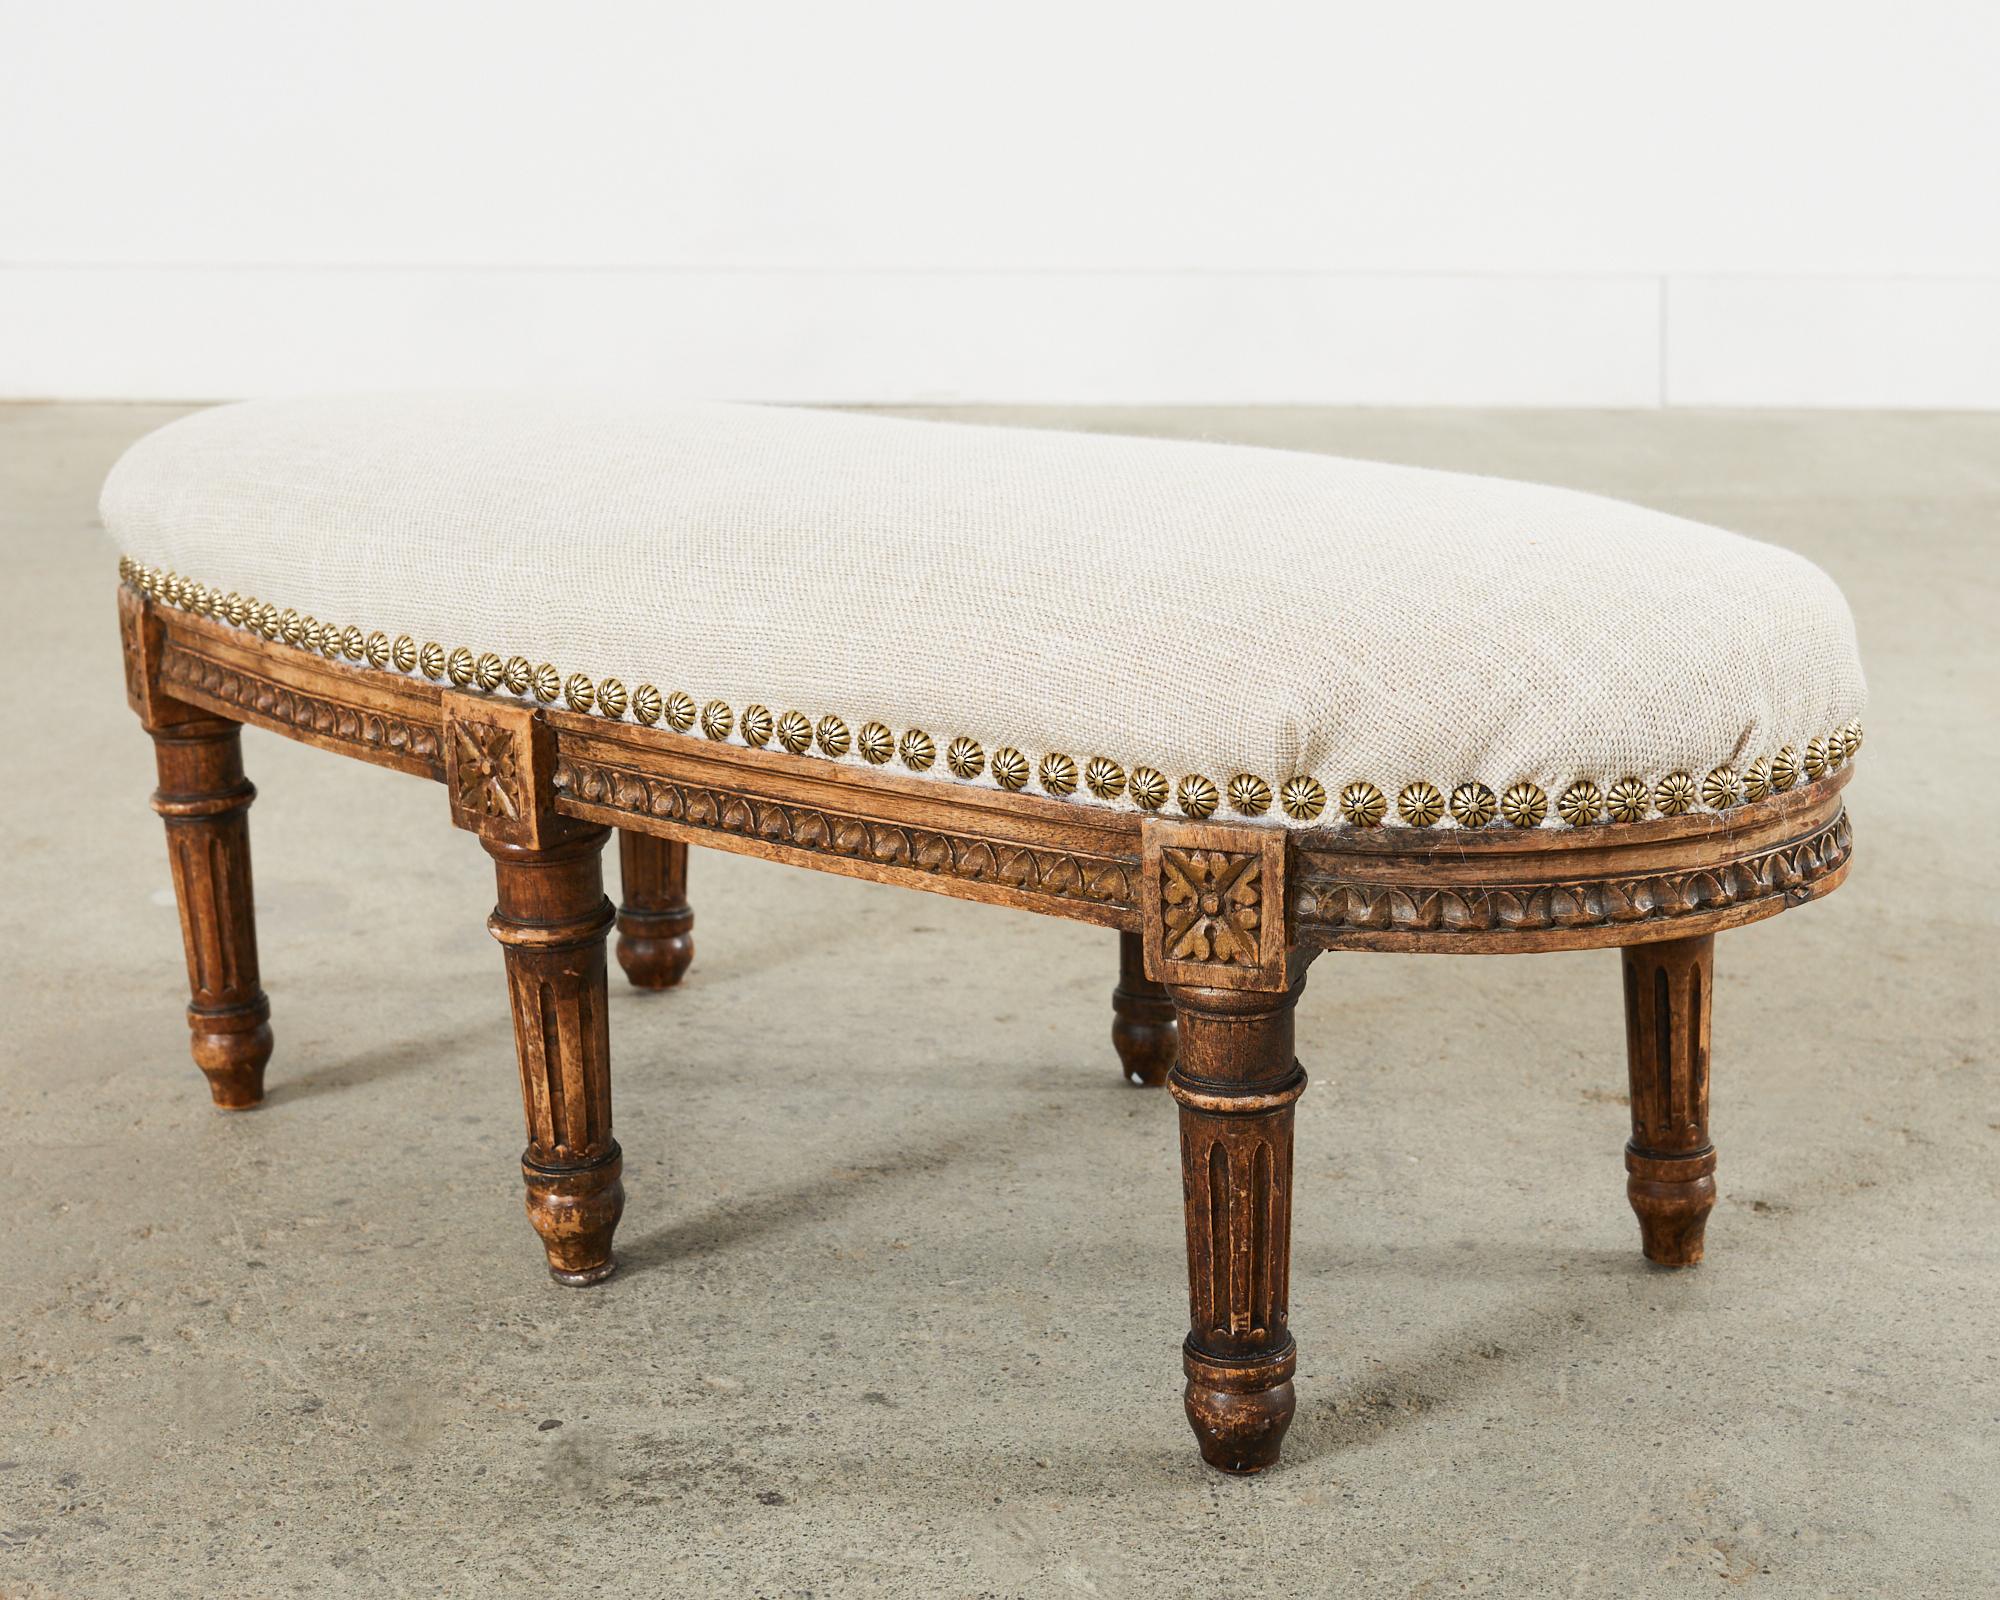 19th Century French Louis XVI Walnut Six Leg Oval Footstool In Distressed Condition For Sale In Rio Vista, CA